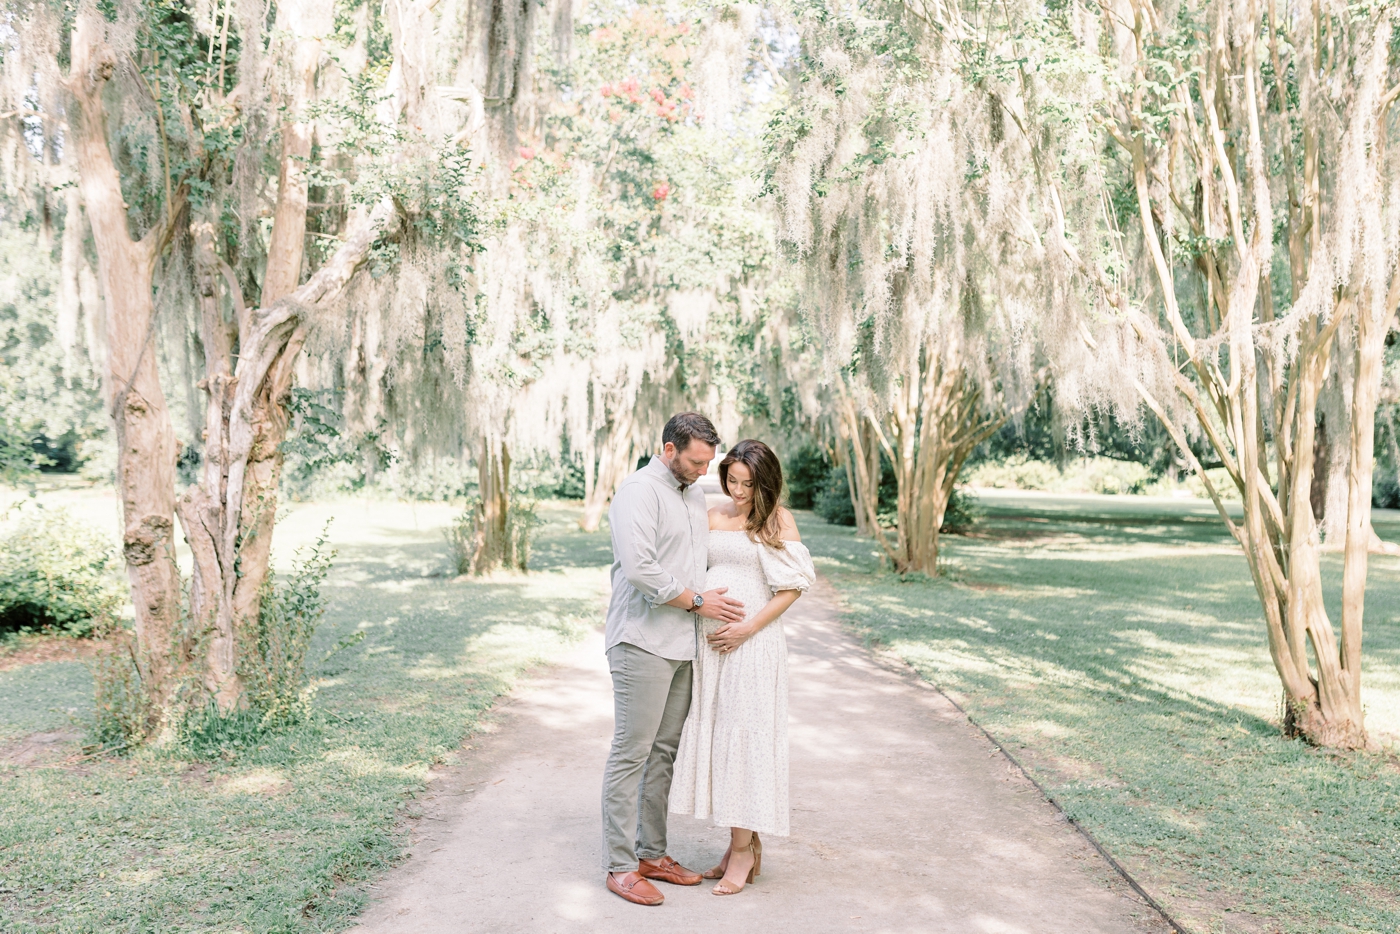 Mom and dad to be under crepe myrtle trees | Photo by Caitlyn Motycka Photography.